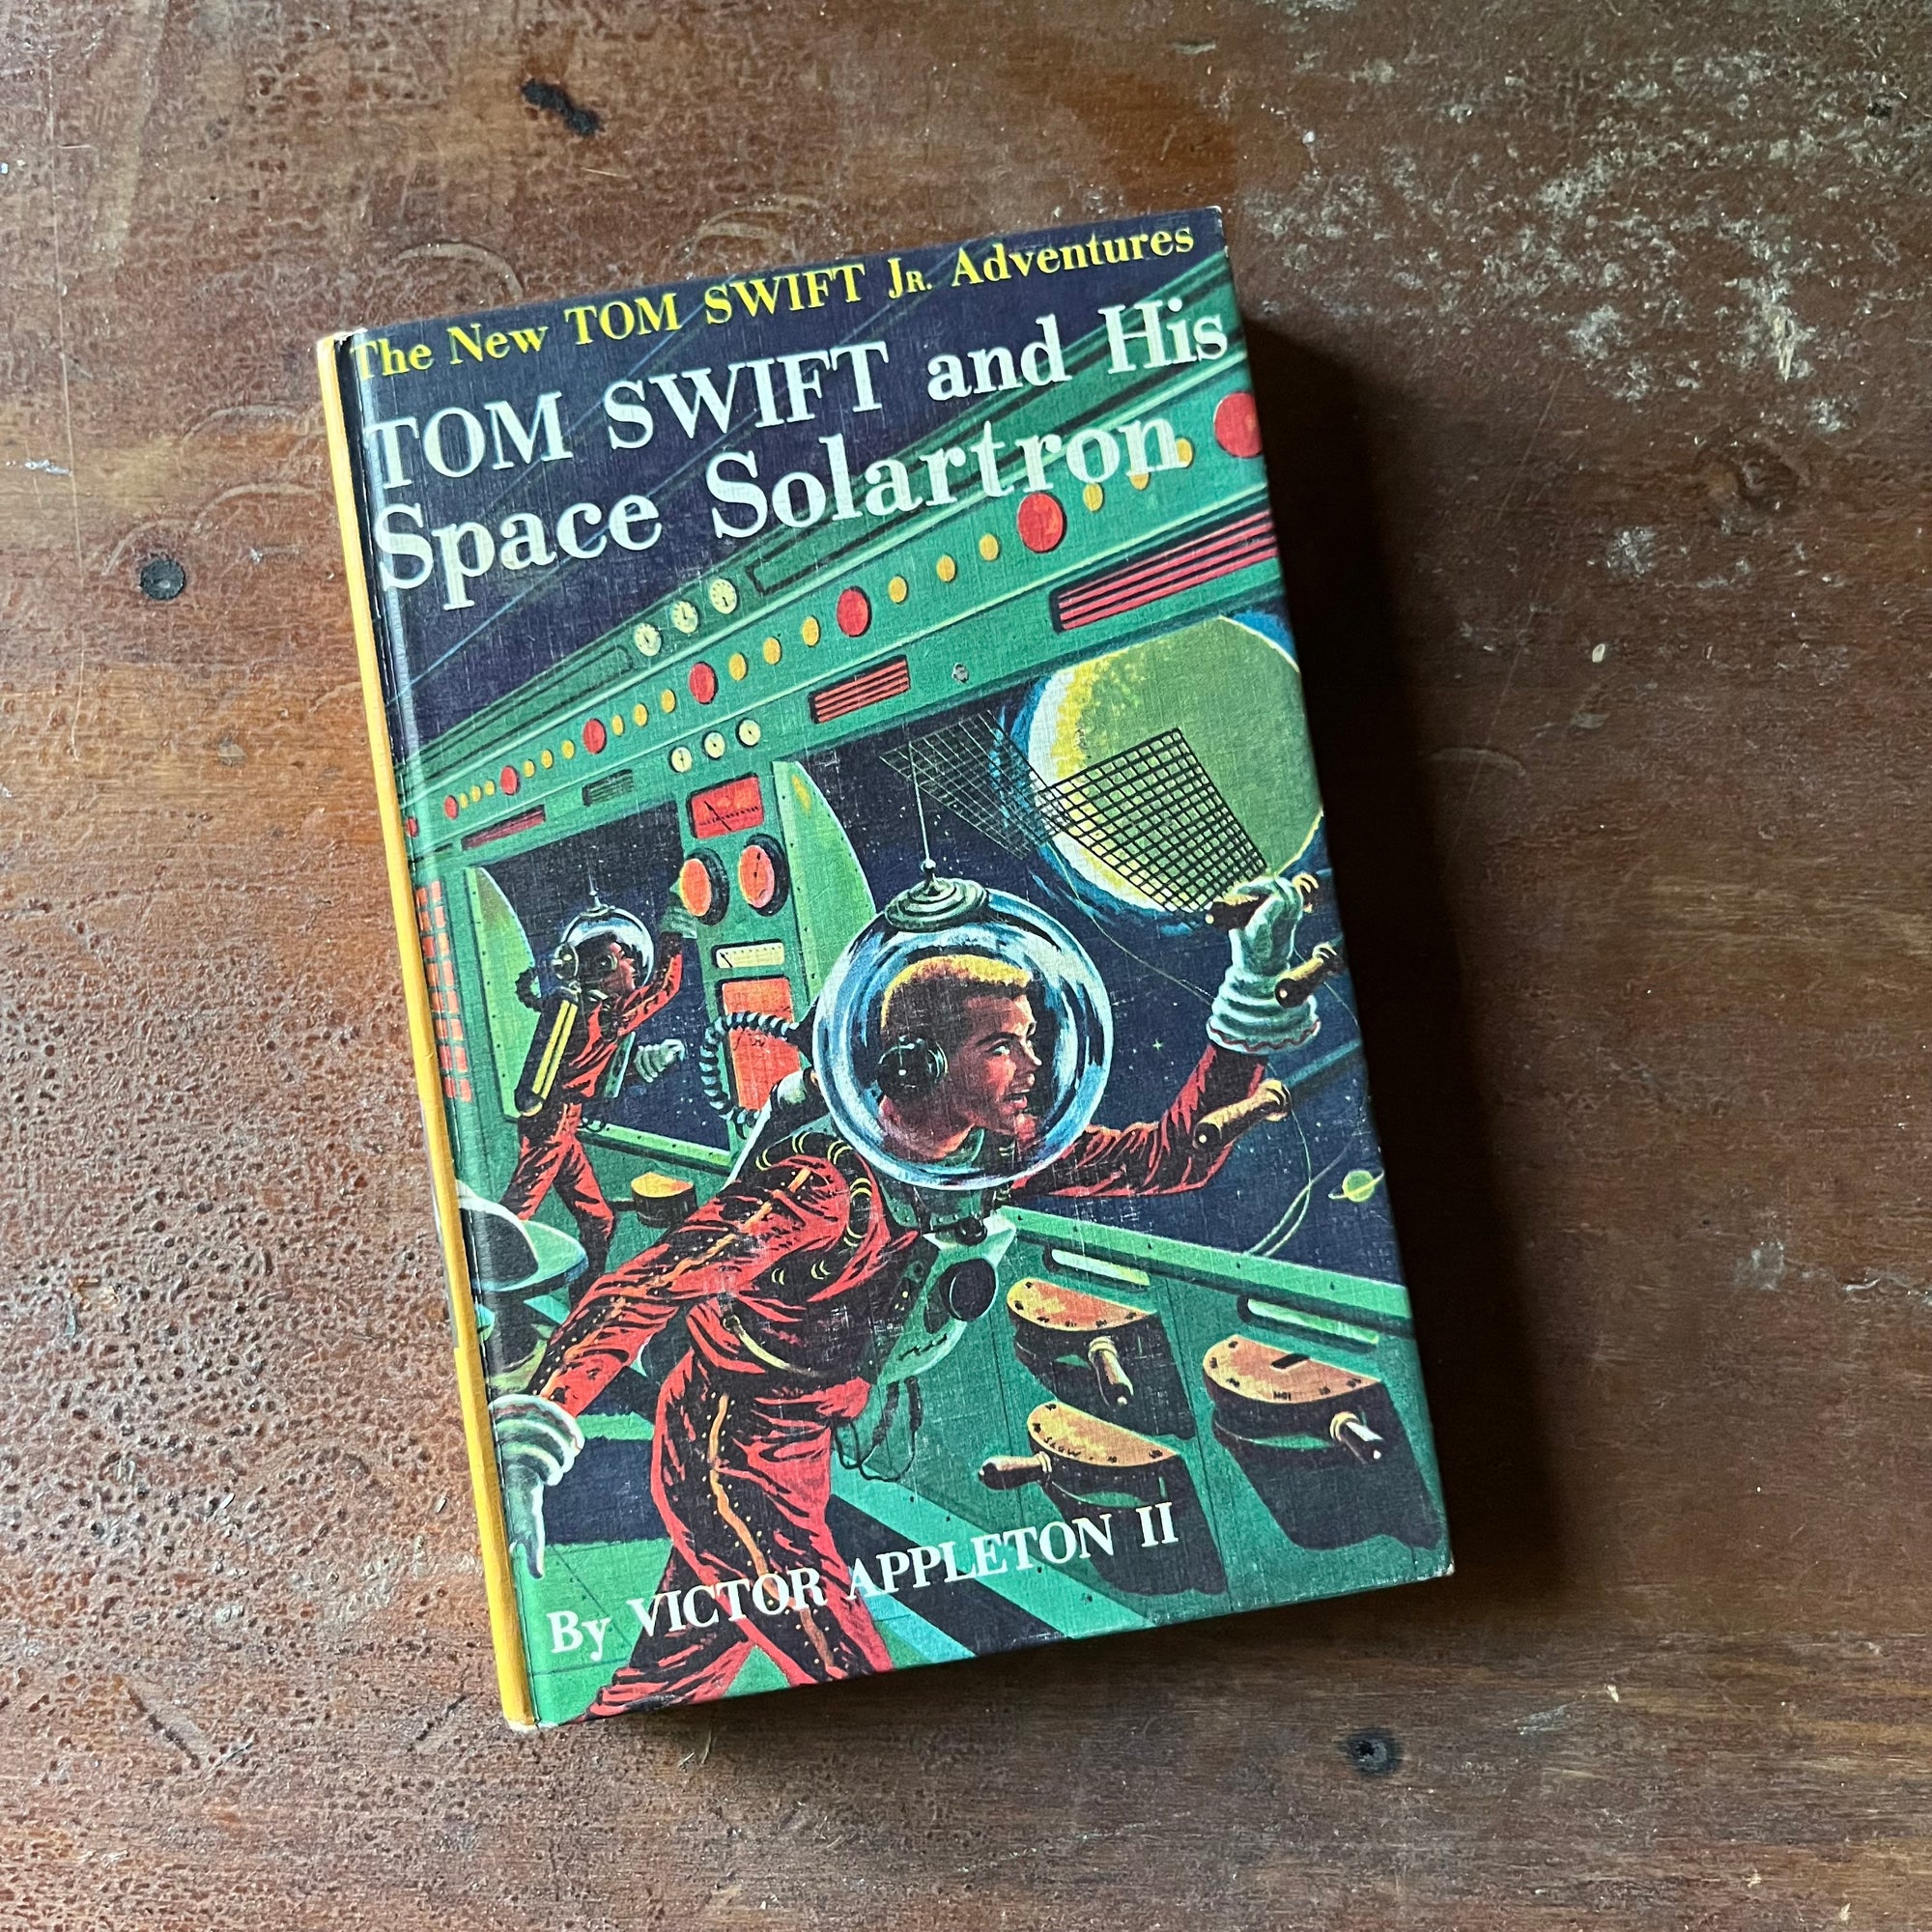 vintage children's chapter book, vintage adventure book, The New Tom Swift Jr. Adventures Book - Tom Swift & This Space Solartron written by Victor Appleton II with illustrations by Graham Kaye - view of the front cover